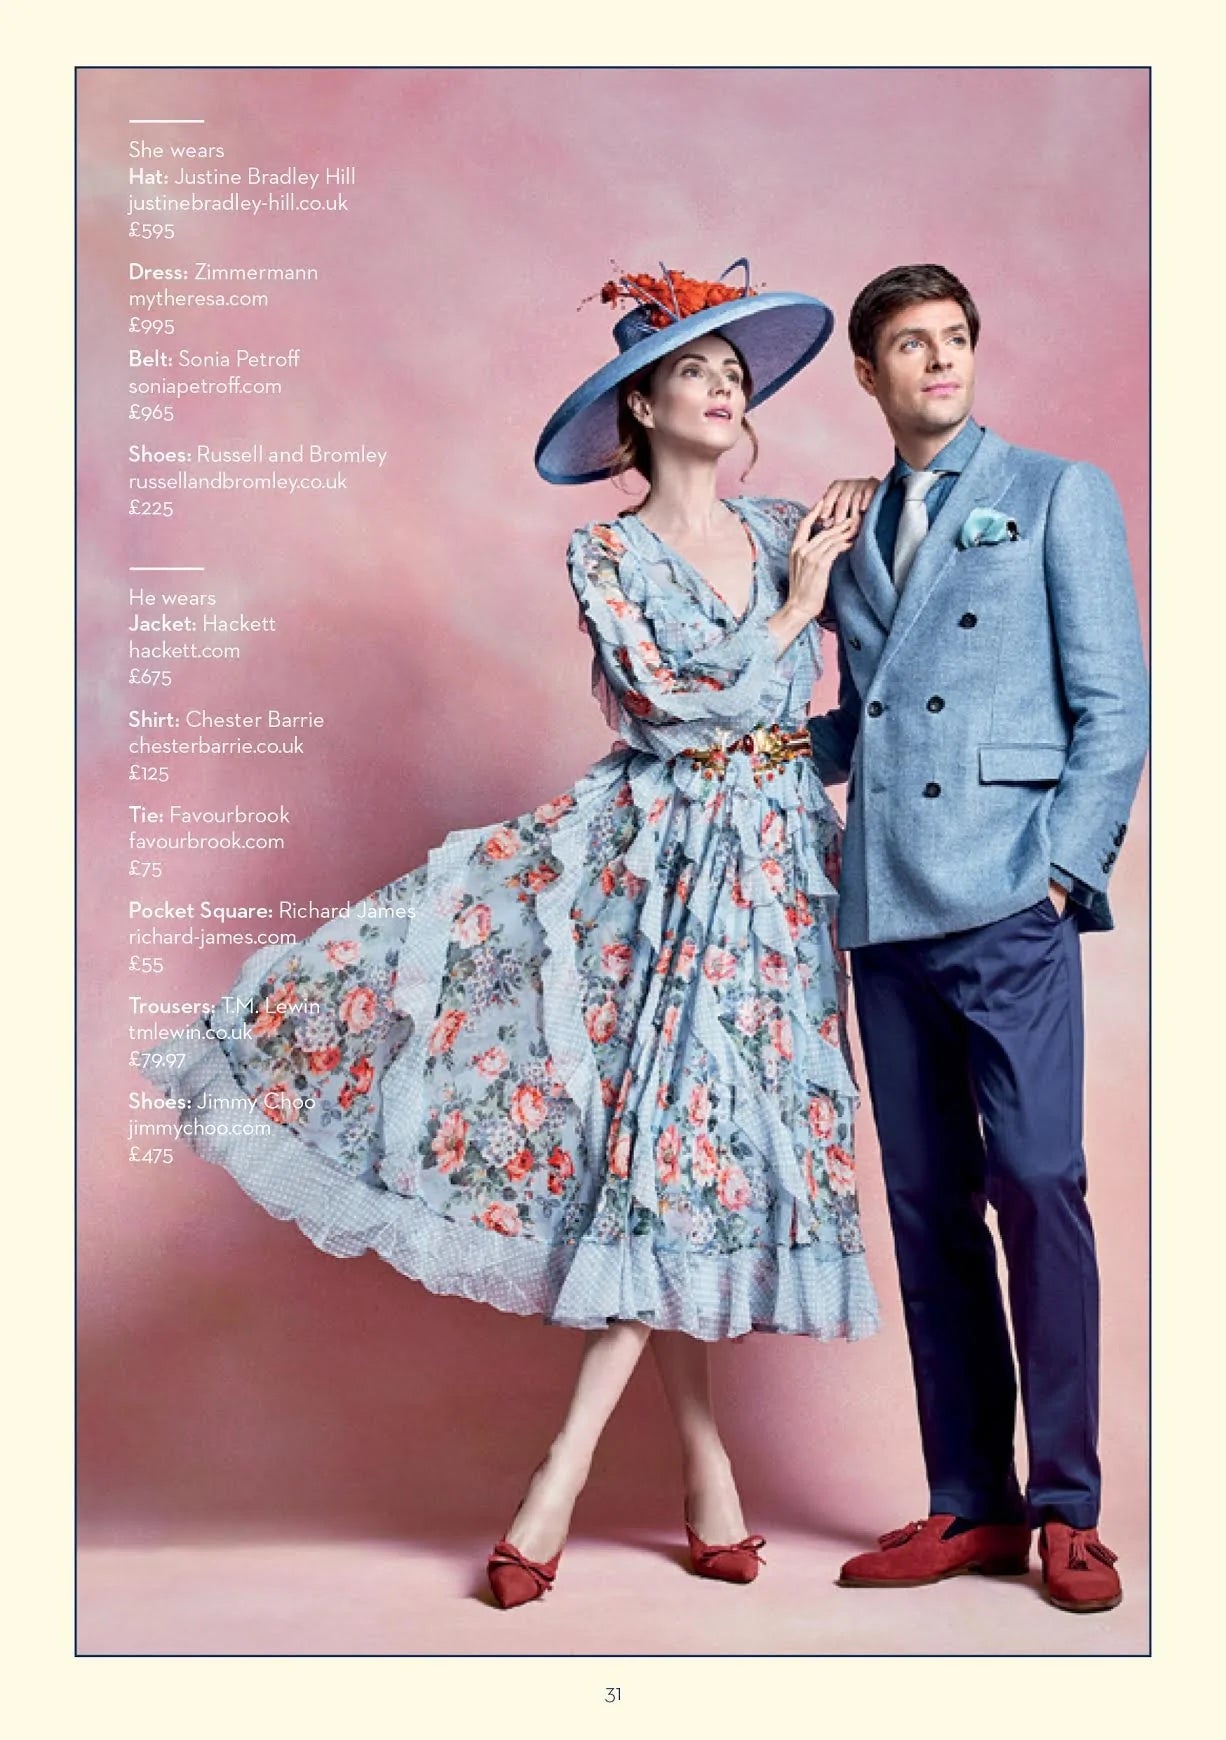 THE ROYAL ASCOT STYLE GUIDE